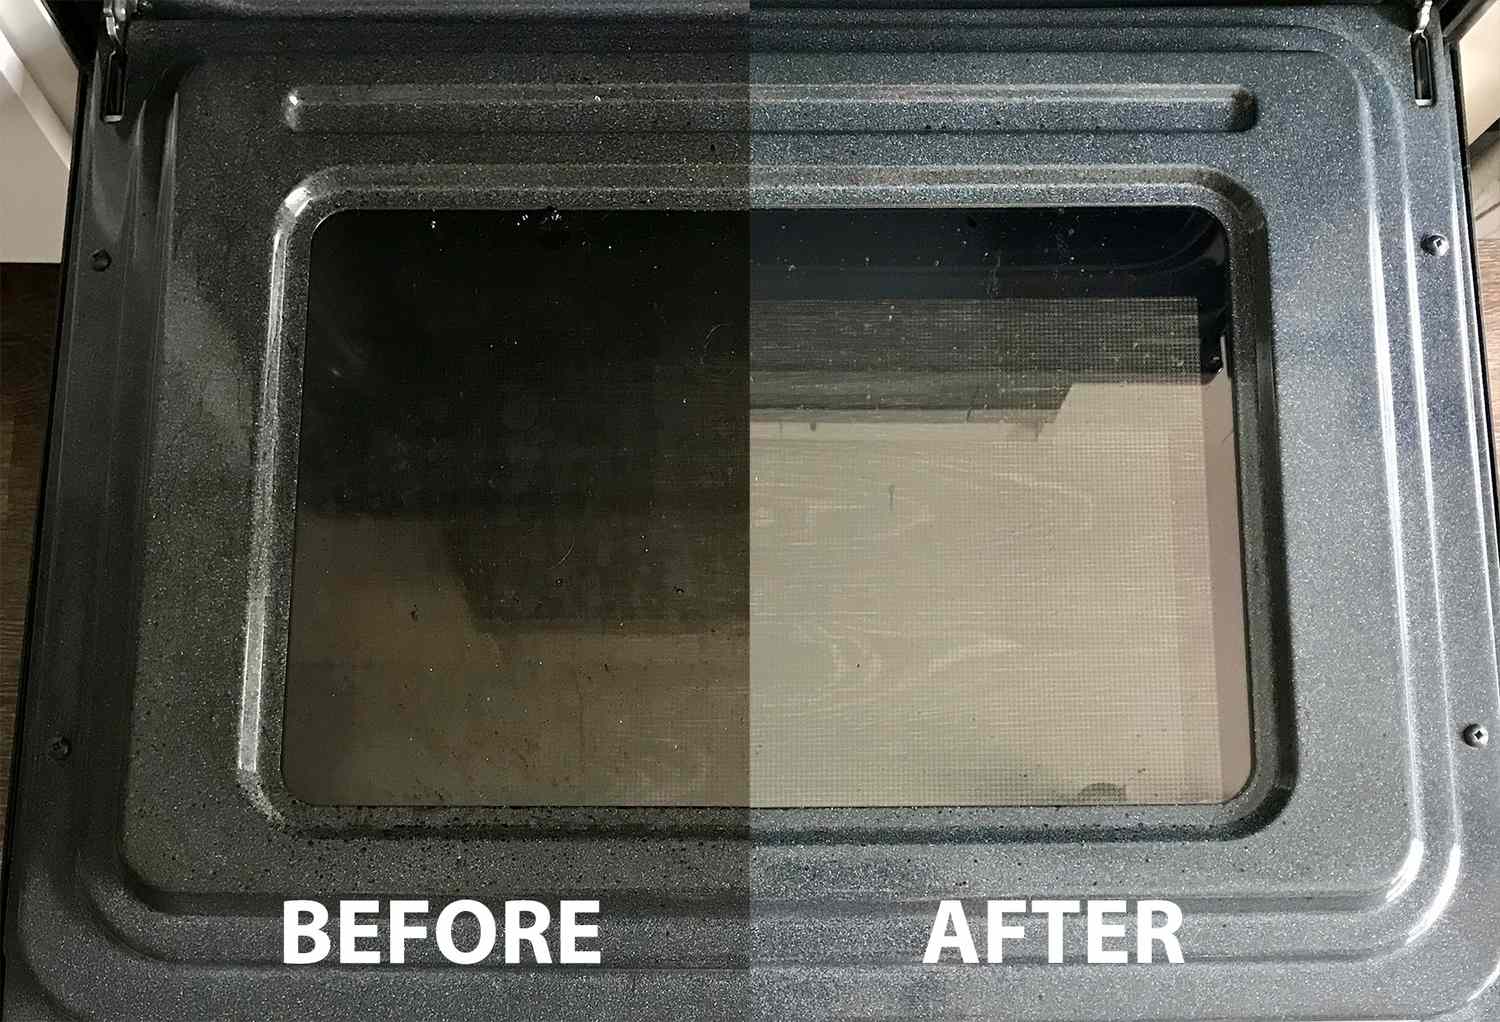 before and after composite photo of oven door